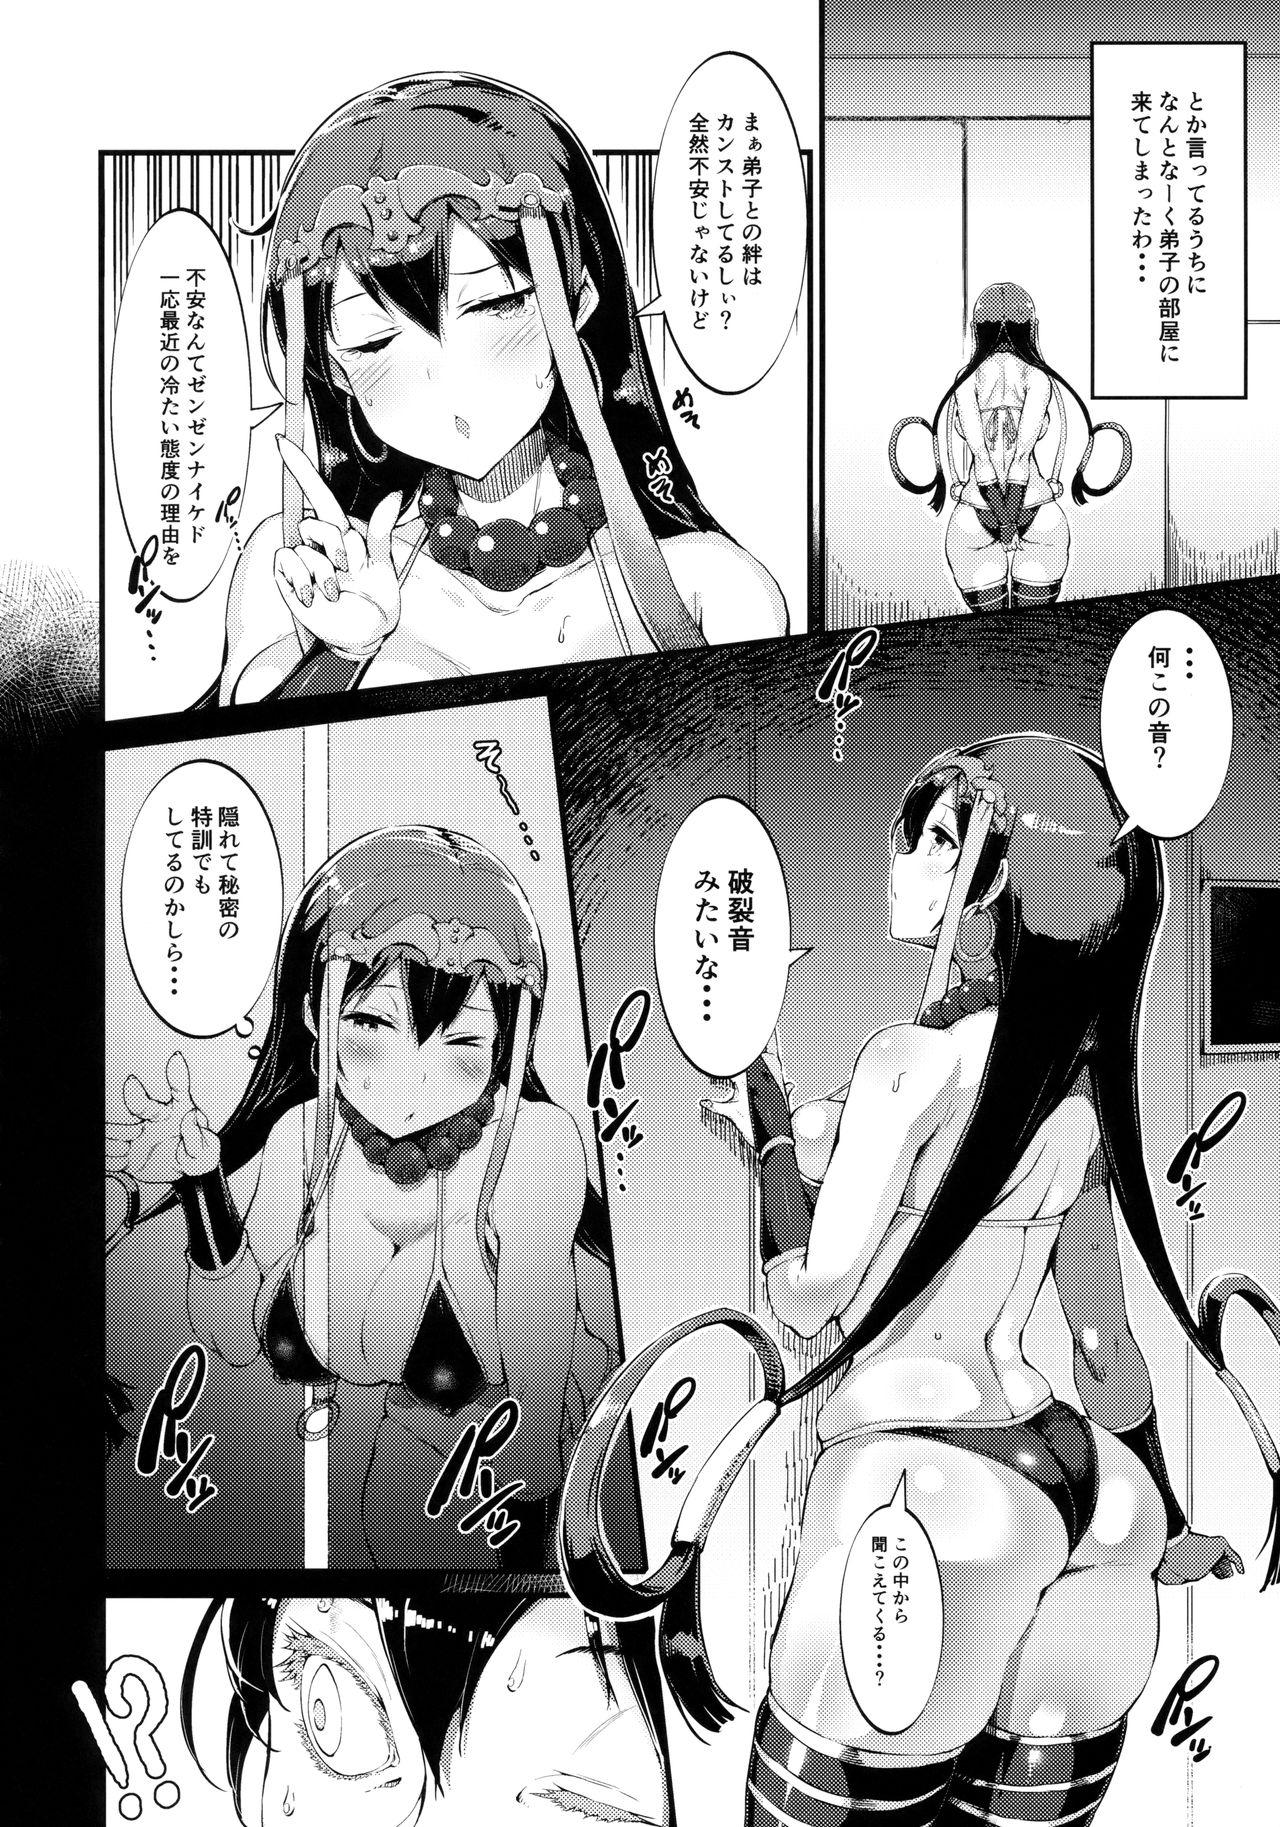 Best Blowjob Ever S&N - Fate grand order Massage - Page 5